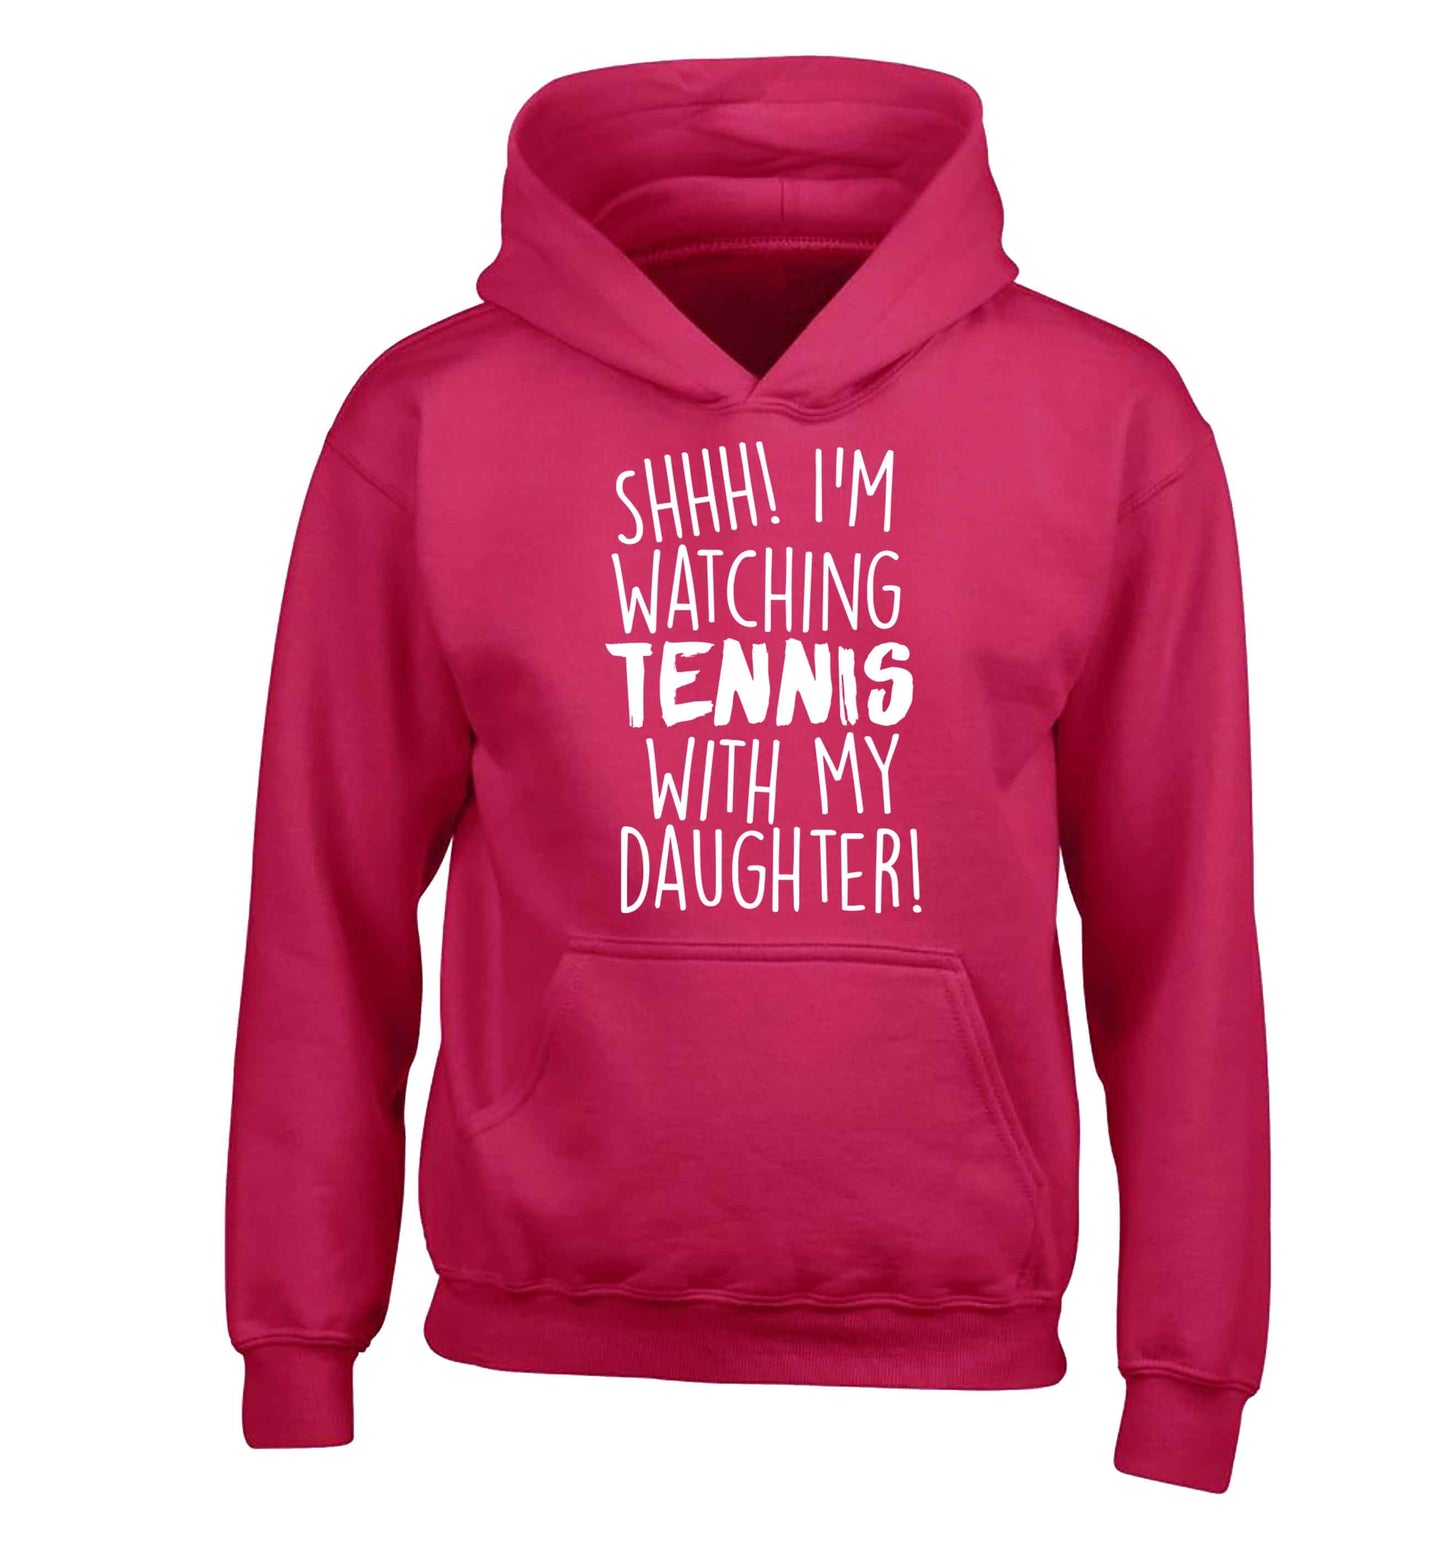 Shh! I'm watching tennis with my daughter! children's pink hoodie 12-13 Years